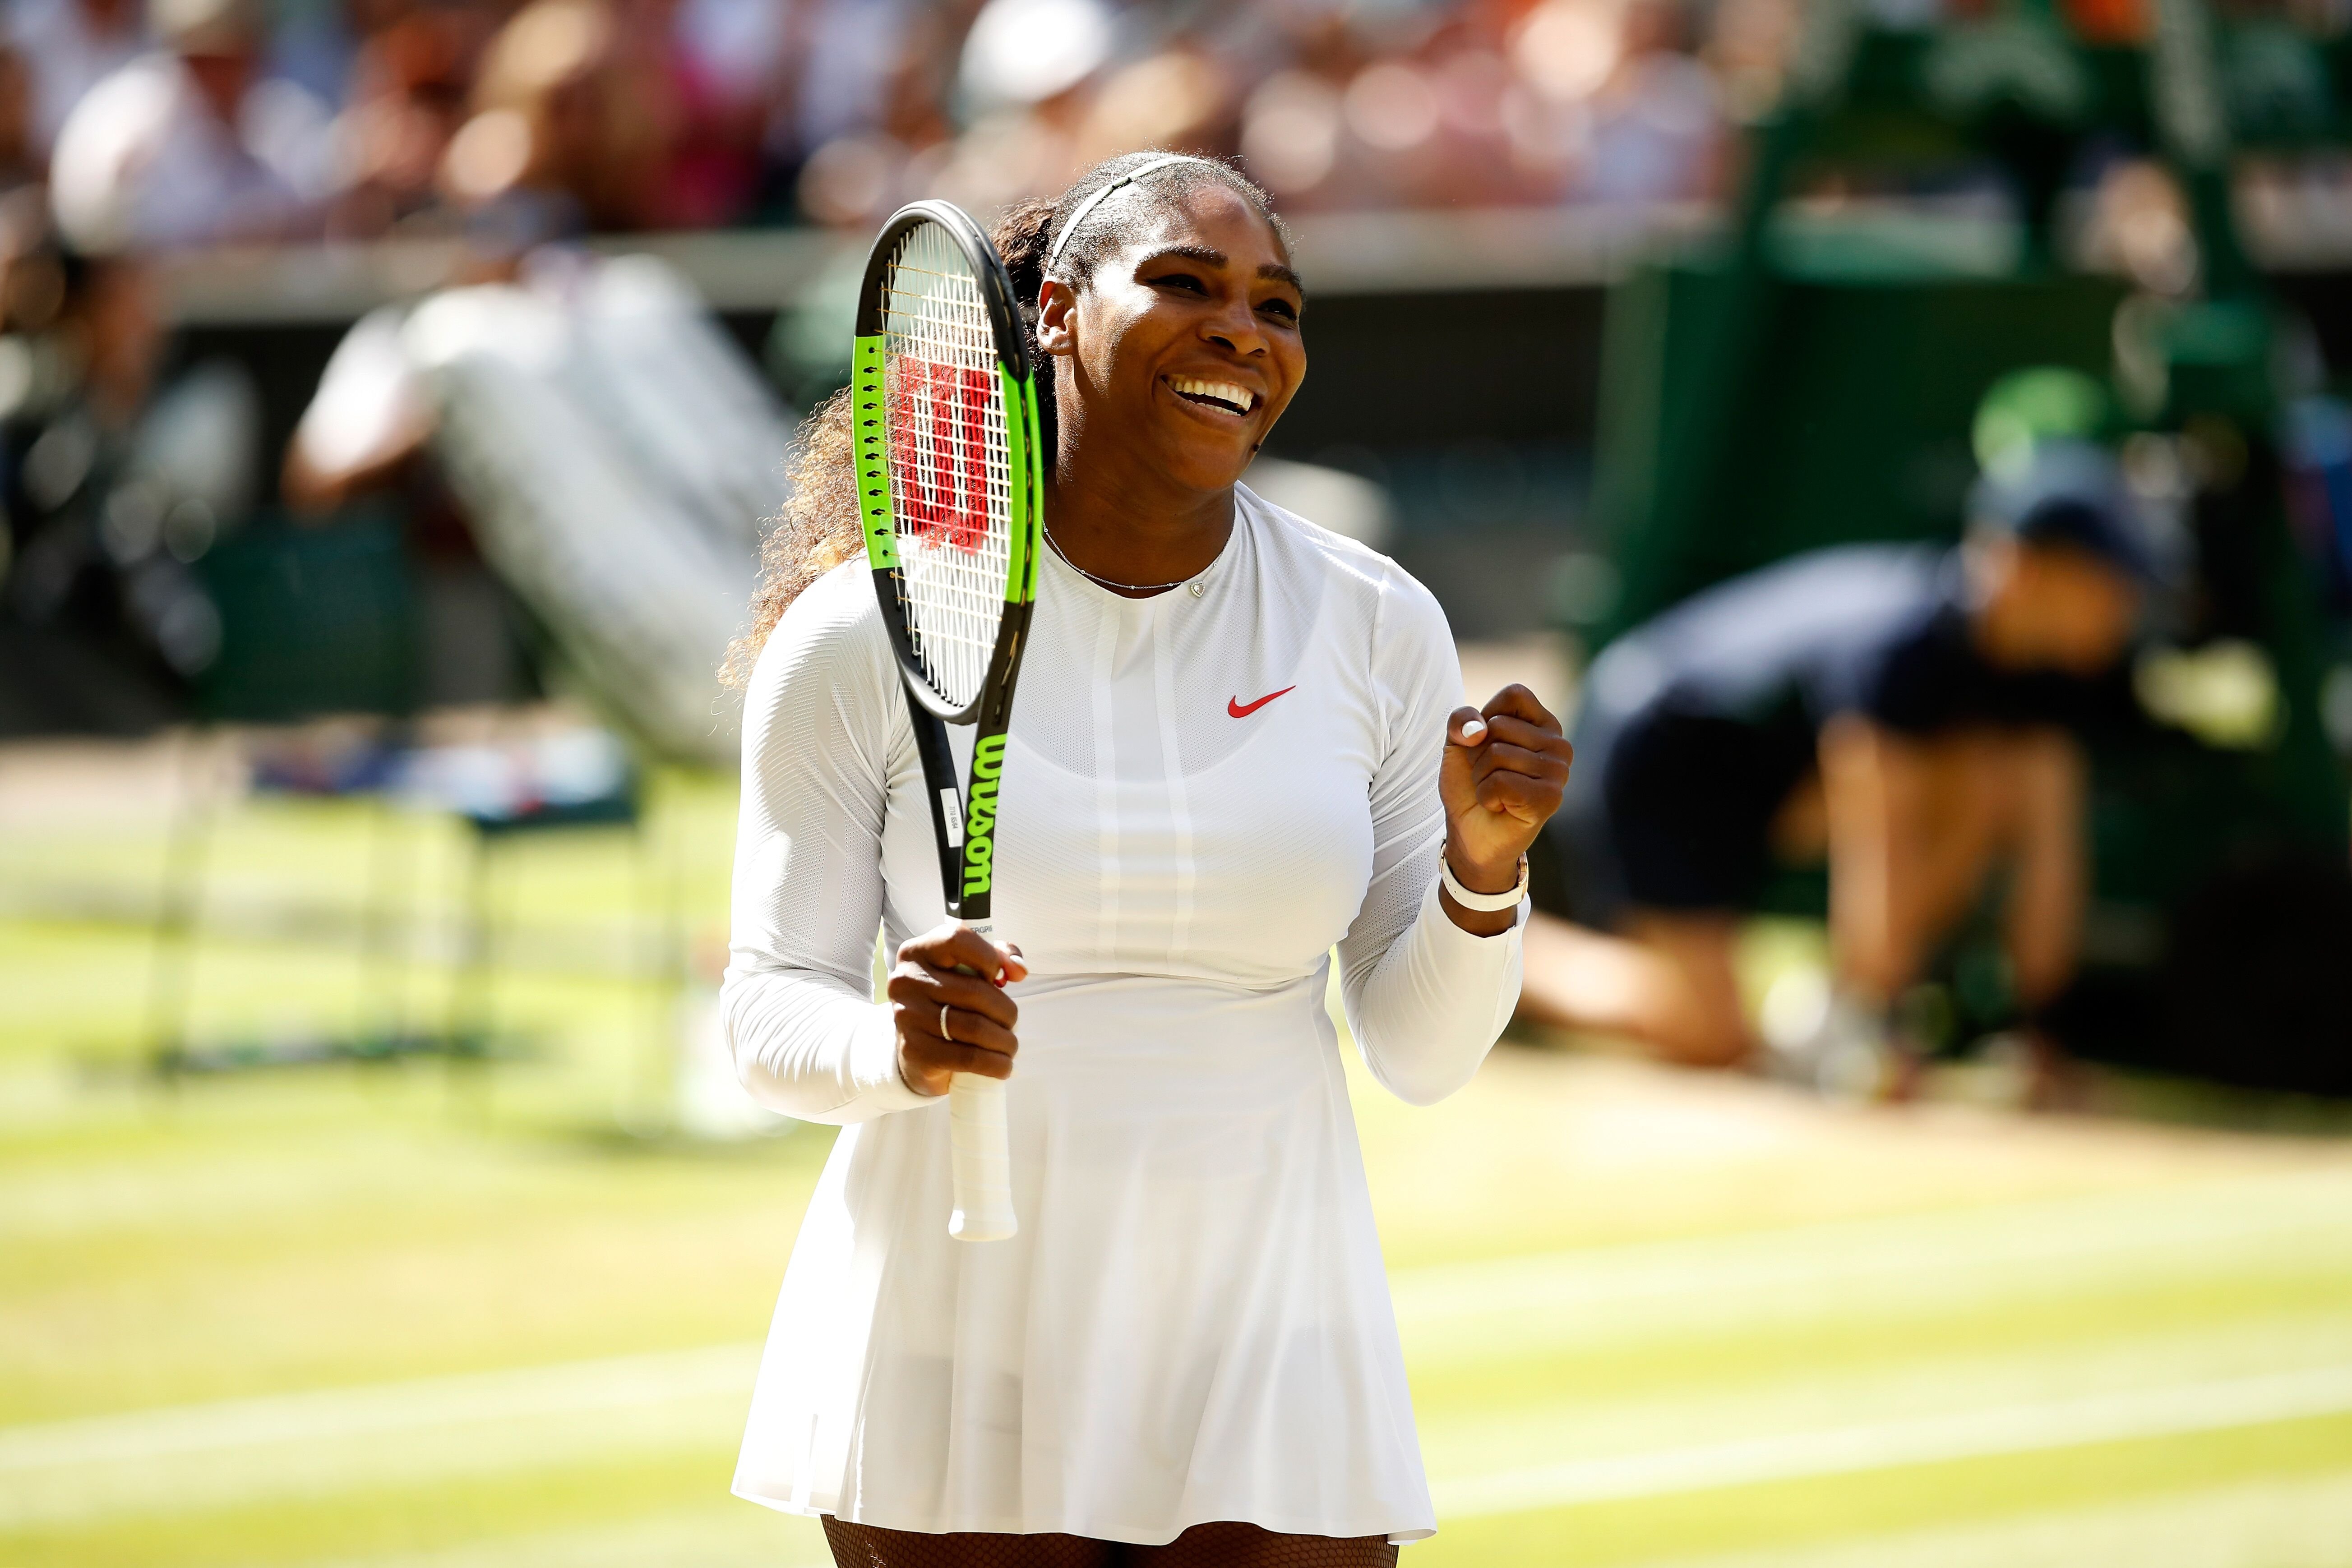 Serena Williams at Wimbledon in 2018/ Source: Getty Images